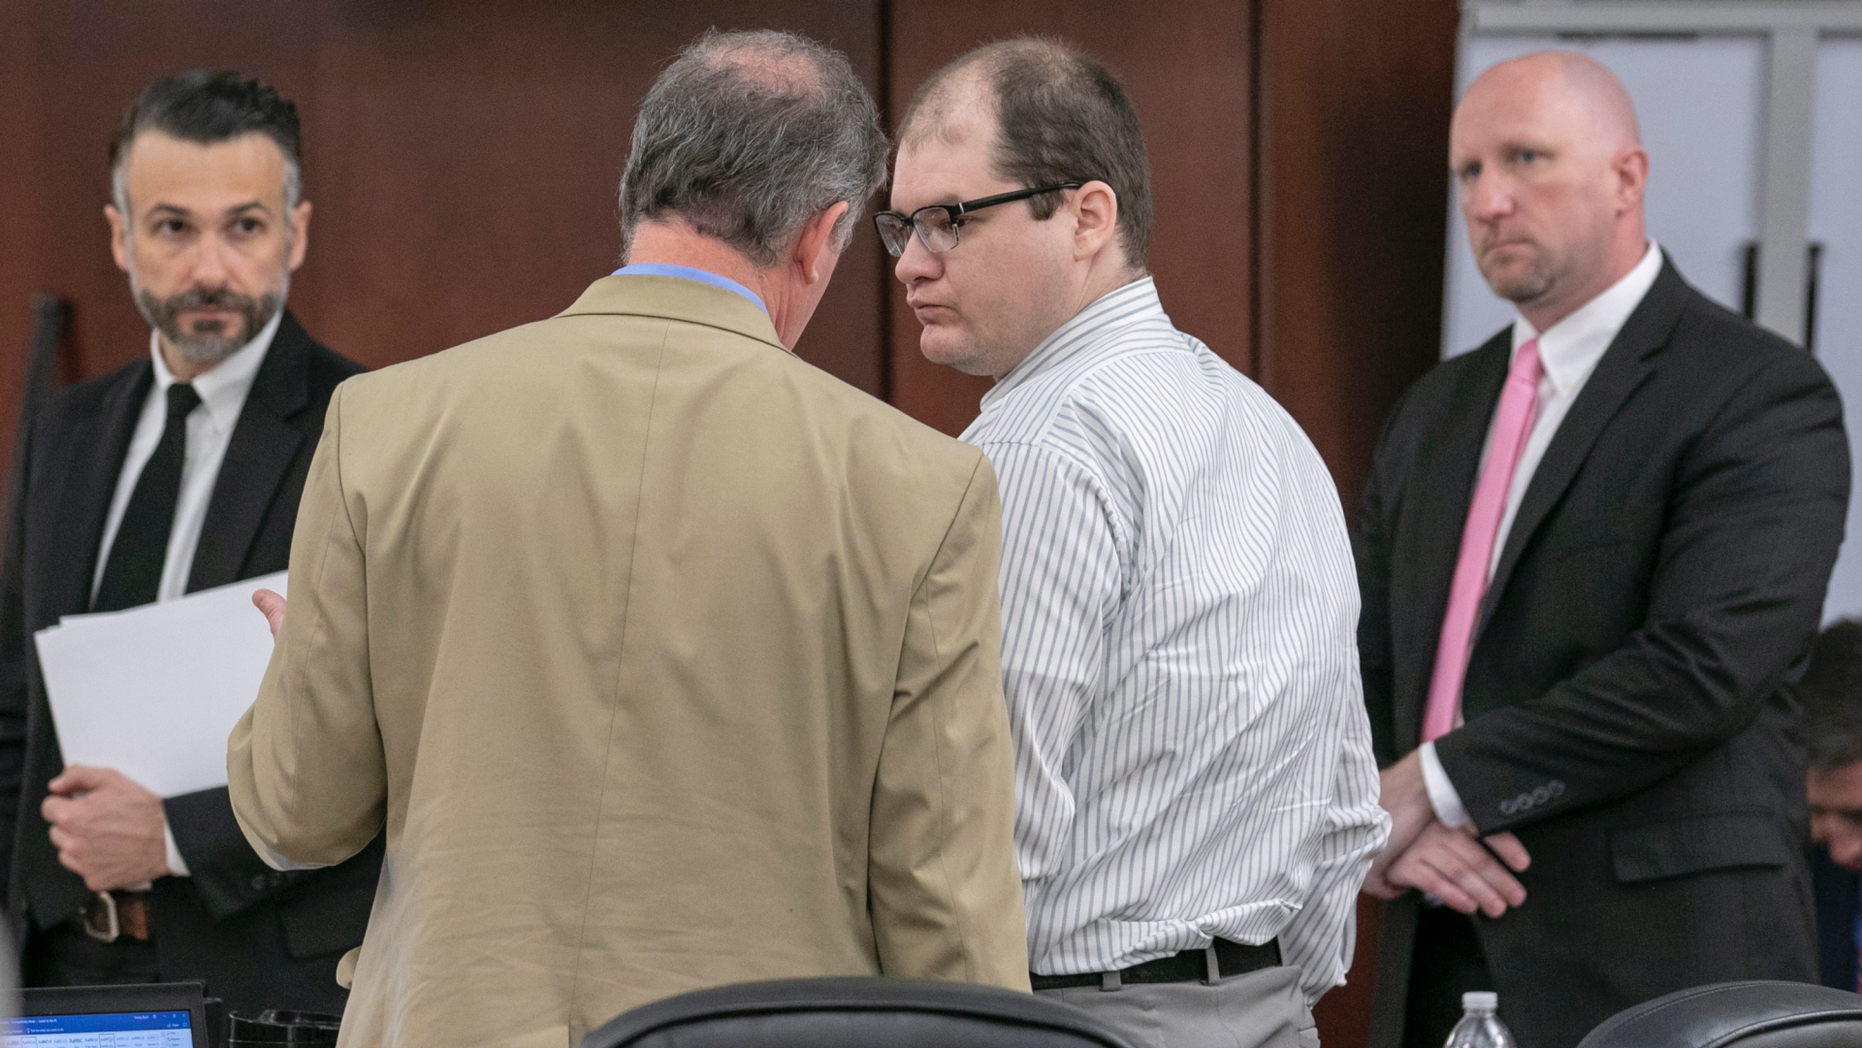 Defense attorney Boyd Young speaks with Tim Jones in the center during the sentencing phase of his trial in Lexington, SC Timothy Jones, Jr. was convicted of murder of his 5 young children in 2014 (Tracy Glantz / The State via AP, Pool).